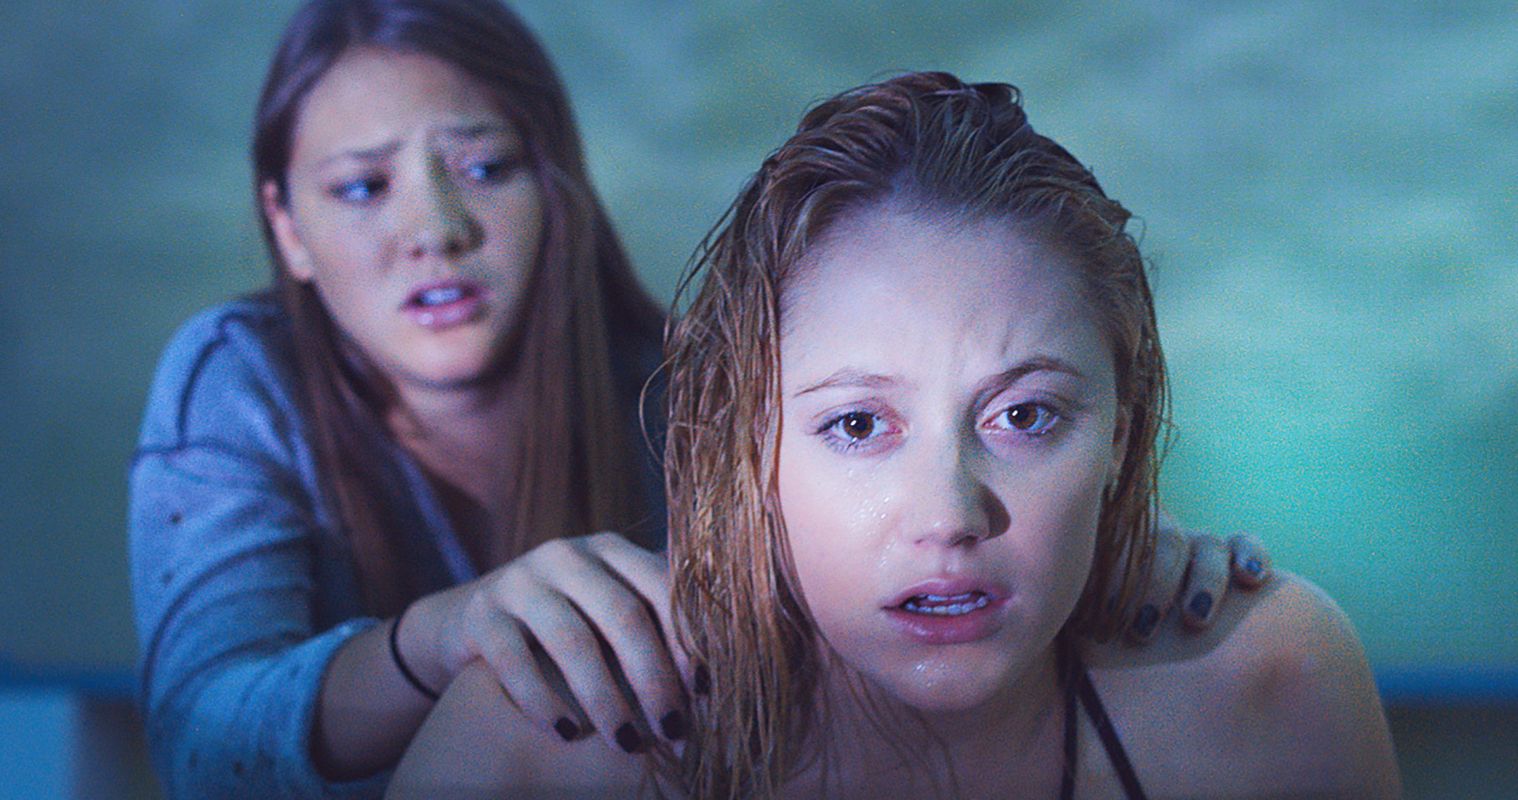 is there going to be a it follows 2